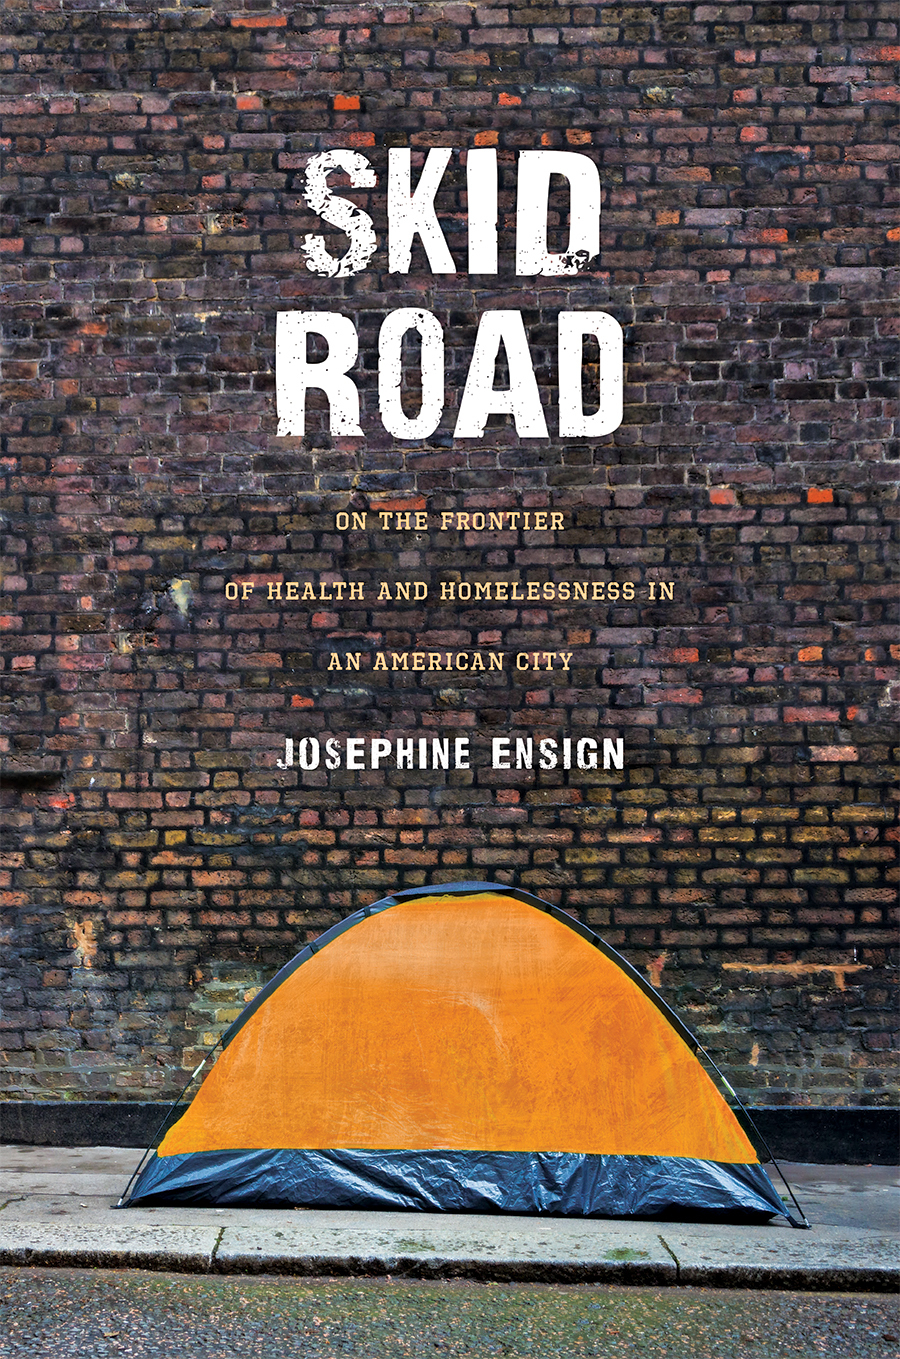 The cover of Skid Road